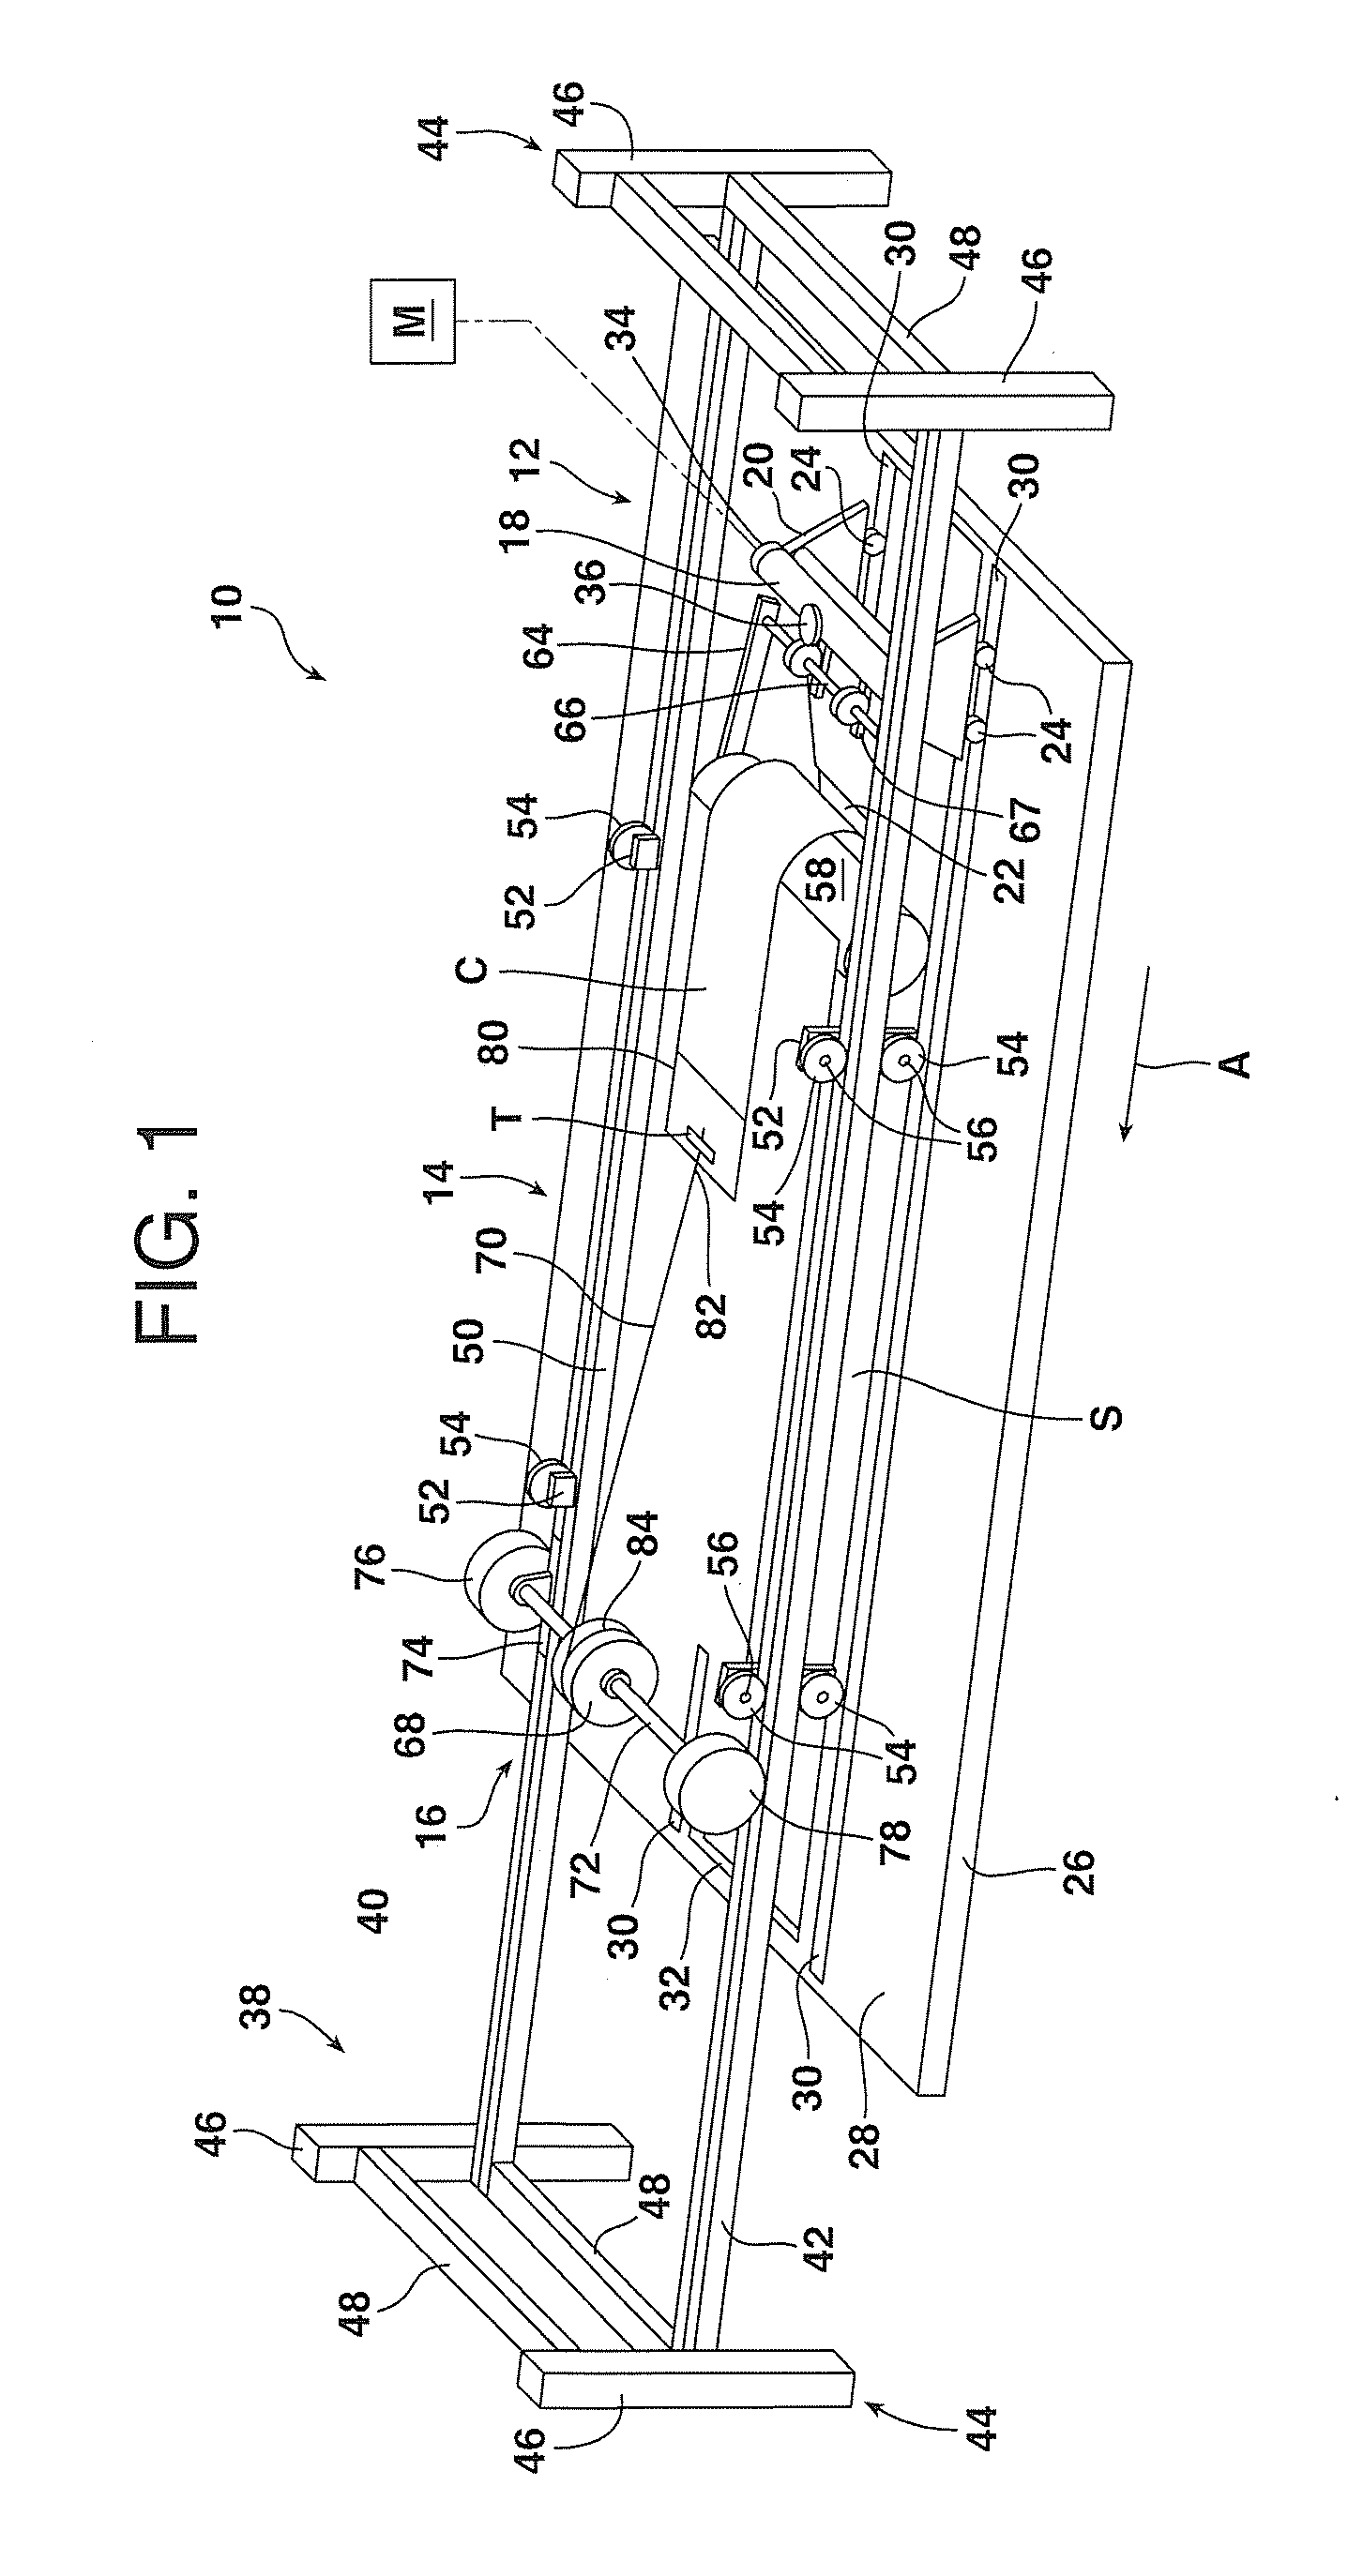 Apparatus and method for harvesting carbon nanotube arrays